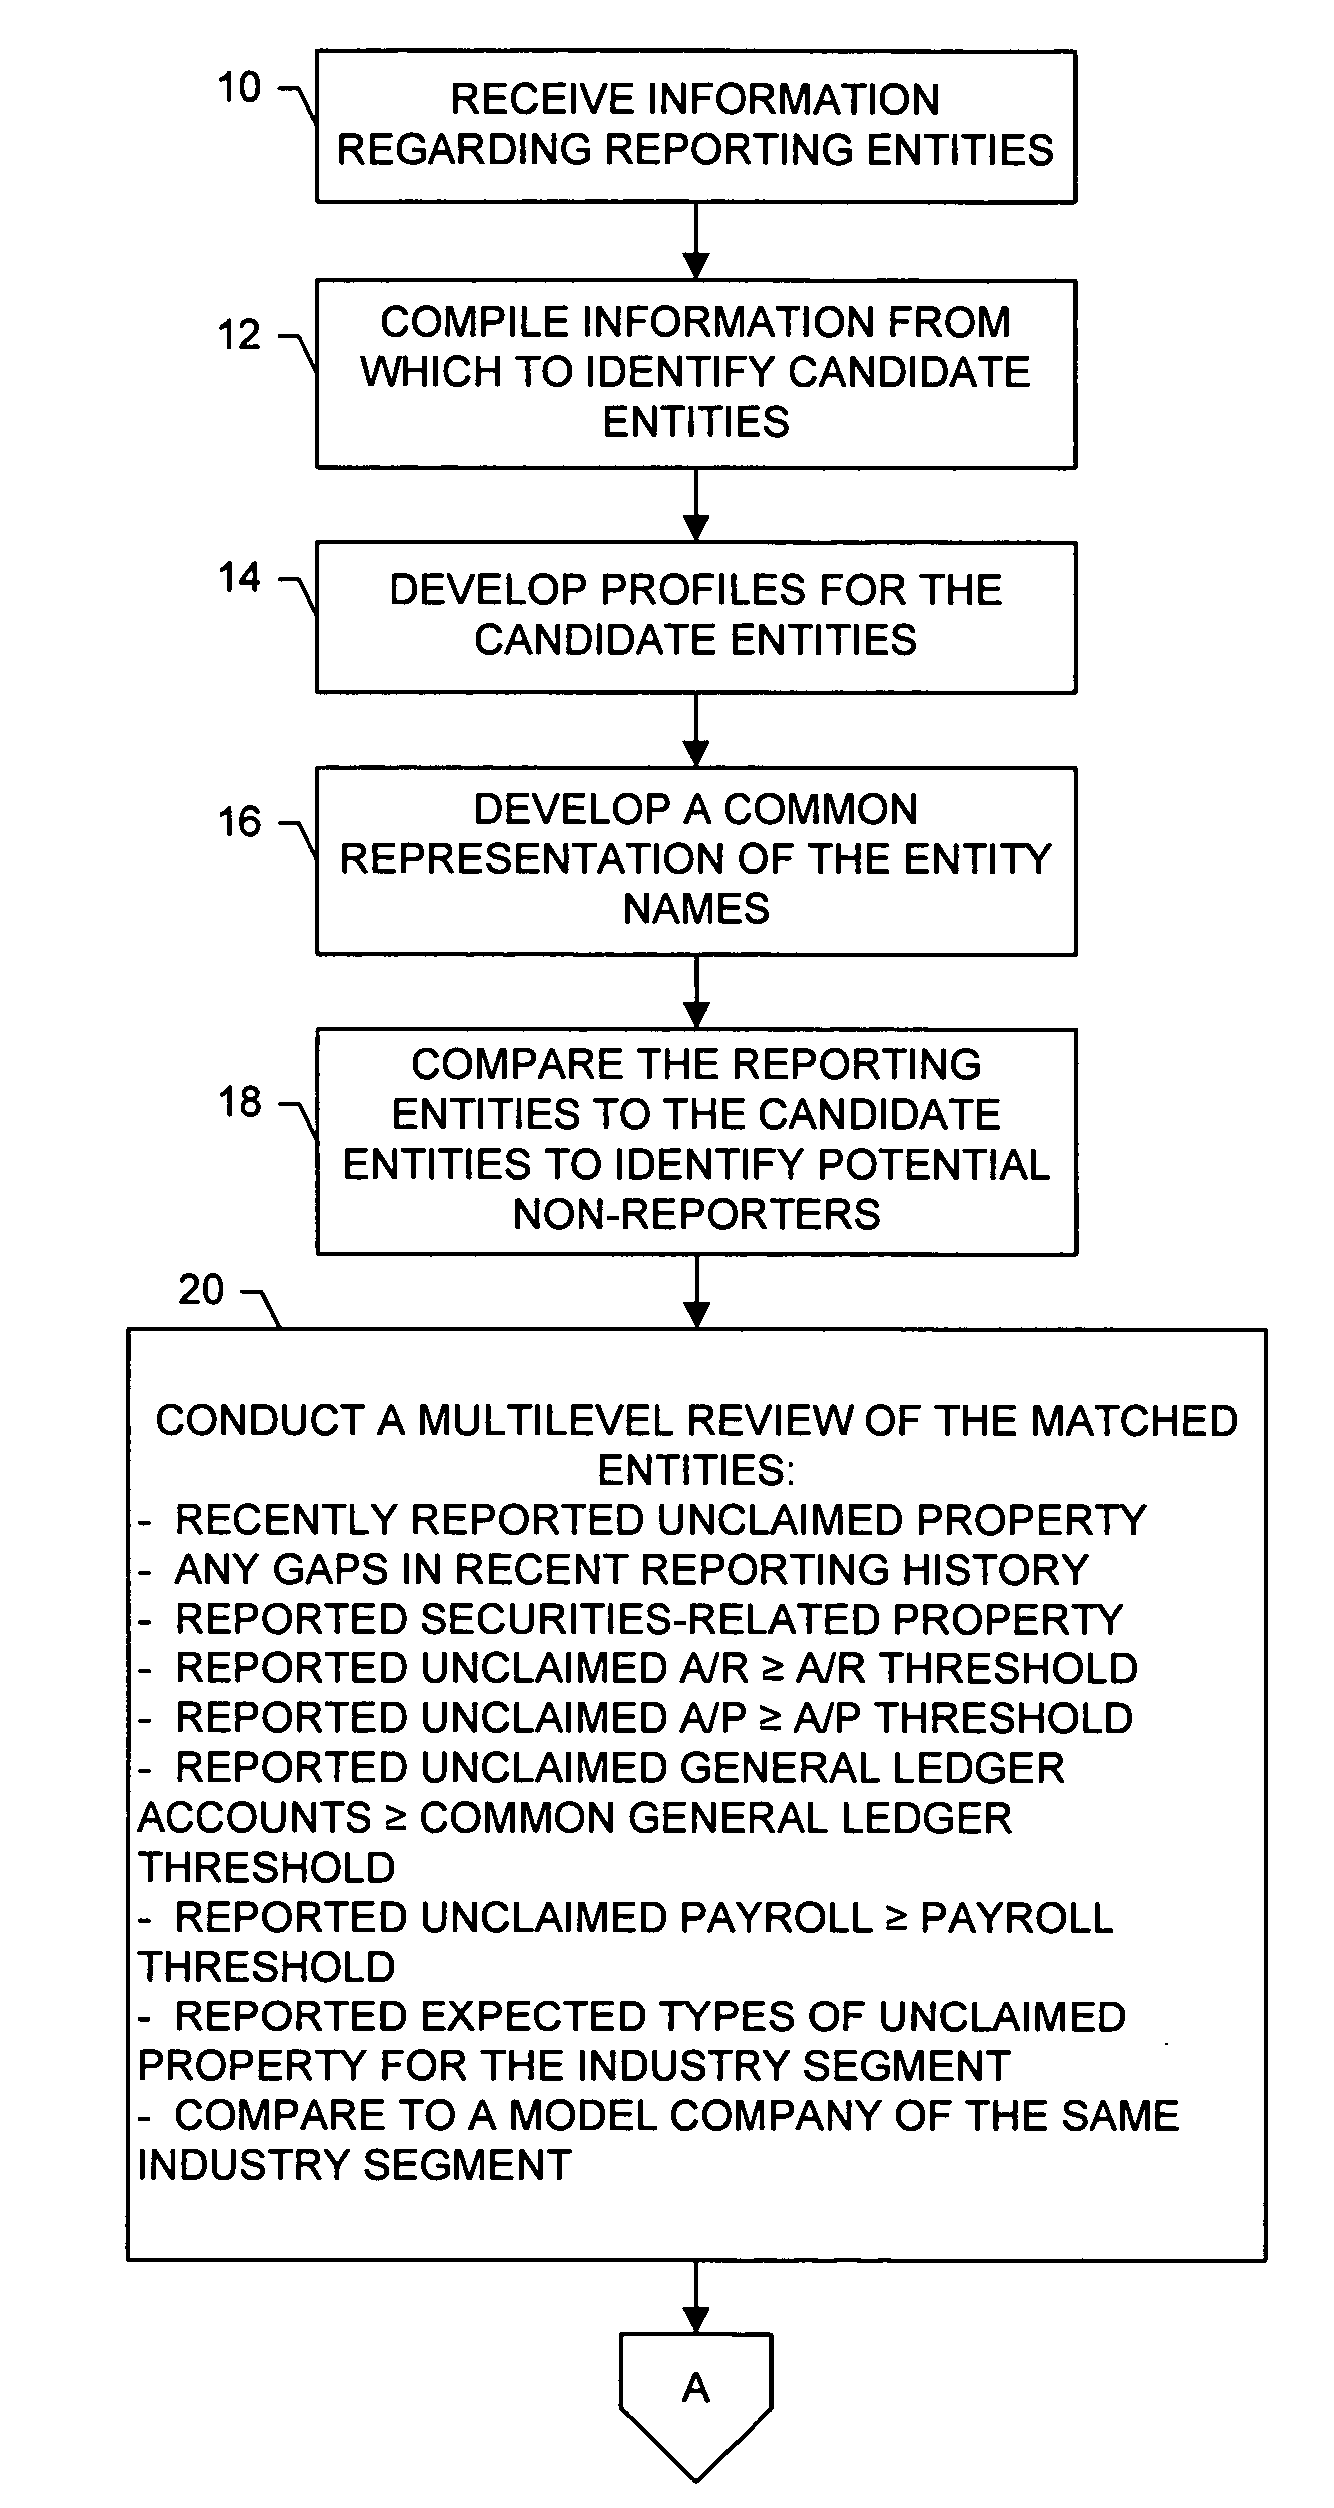 Method, apparatus and computer program product for monitoring compliance in reporting unclaimed property